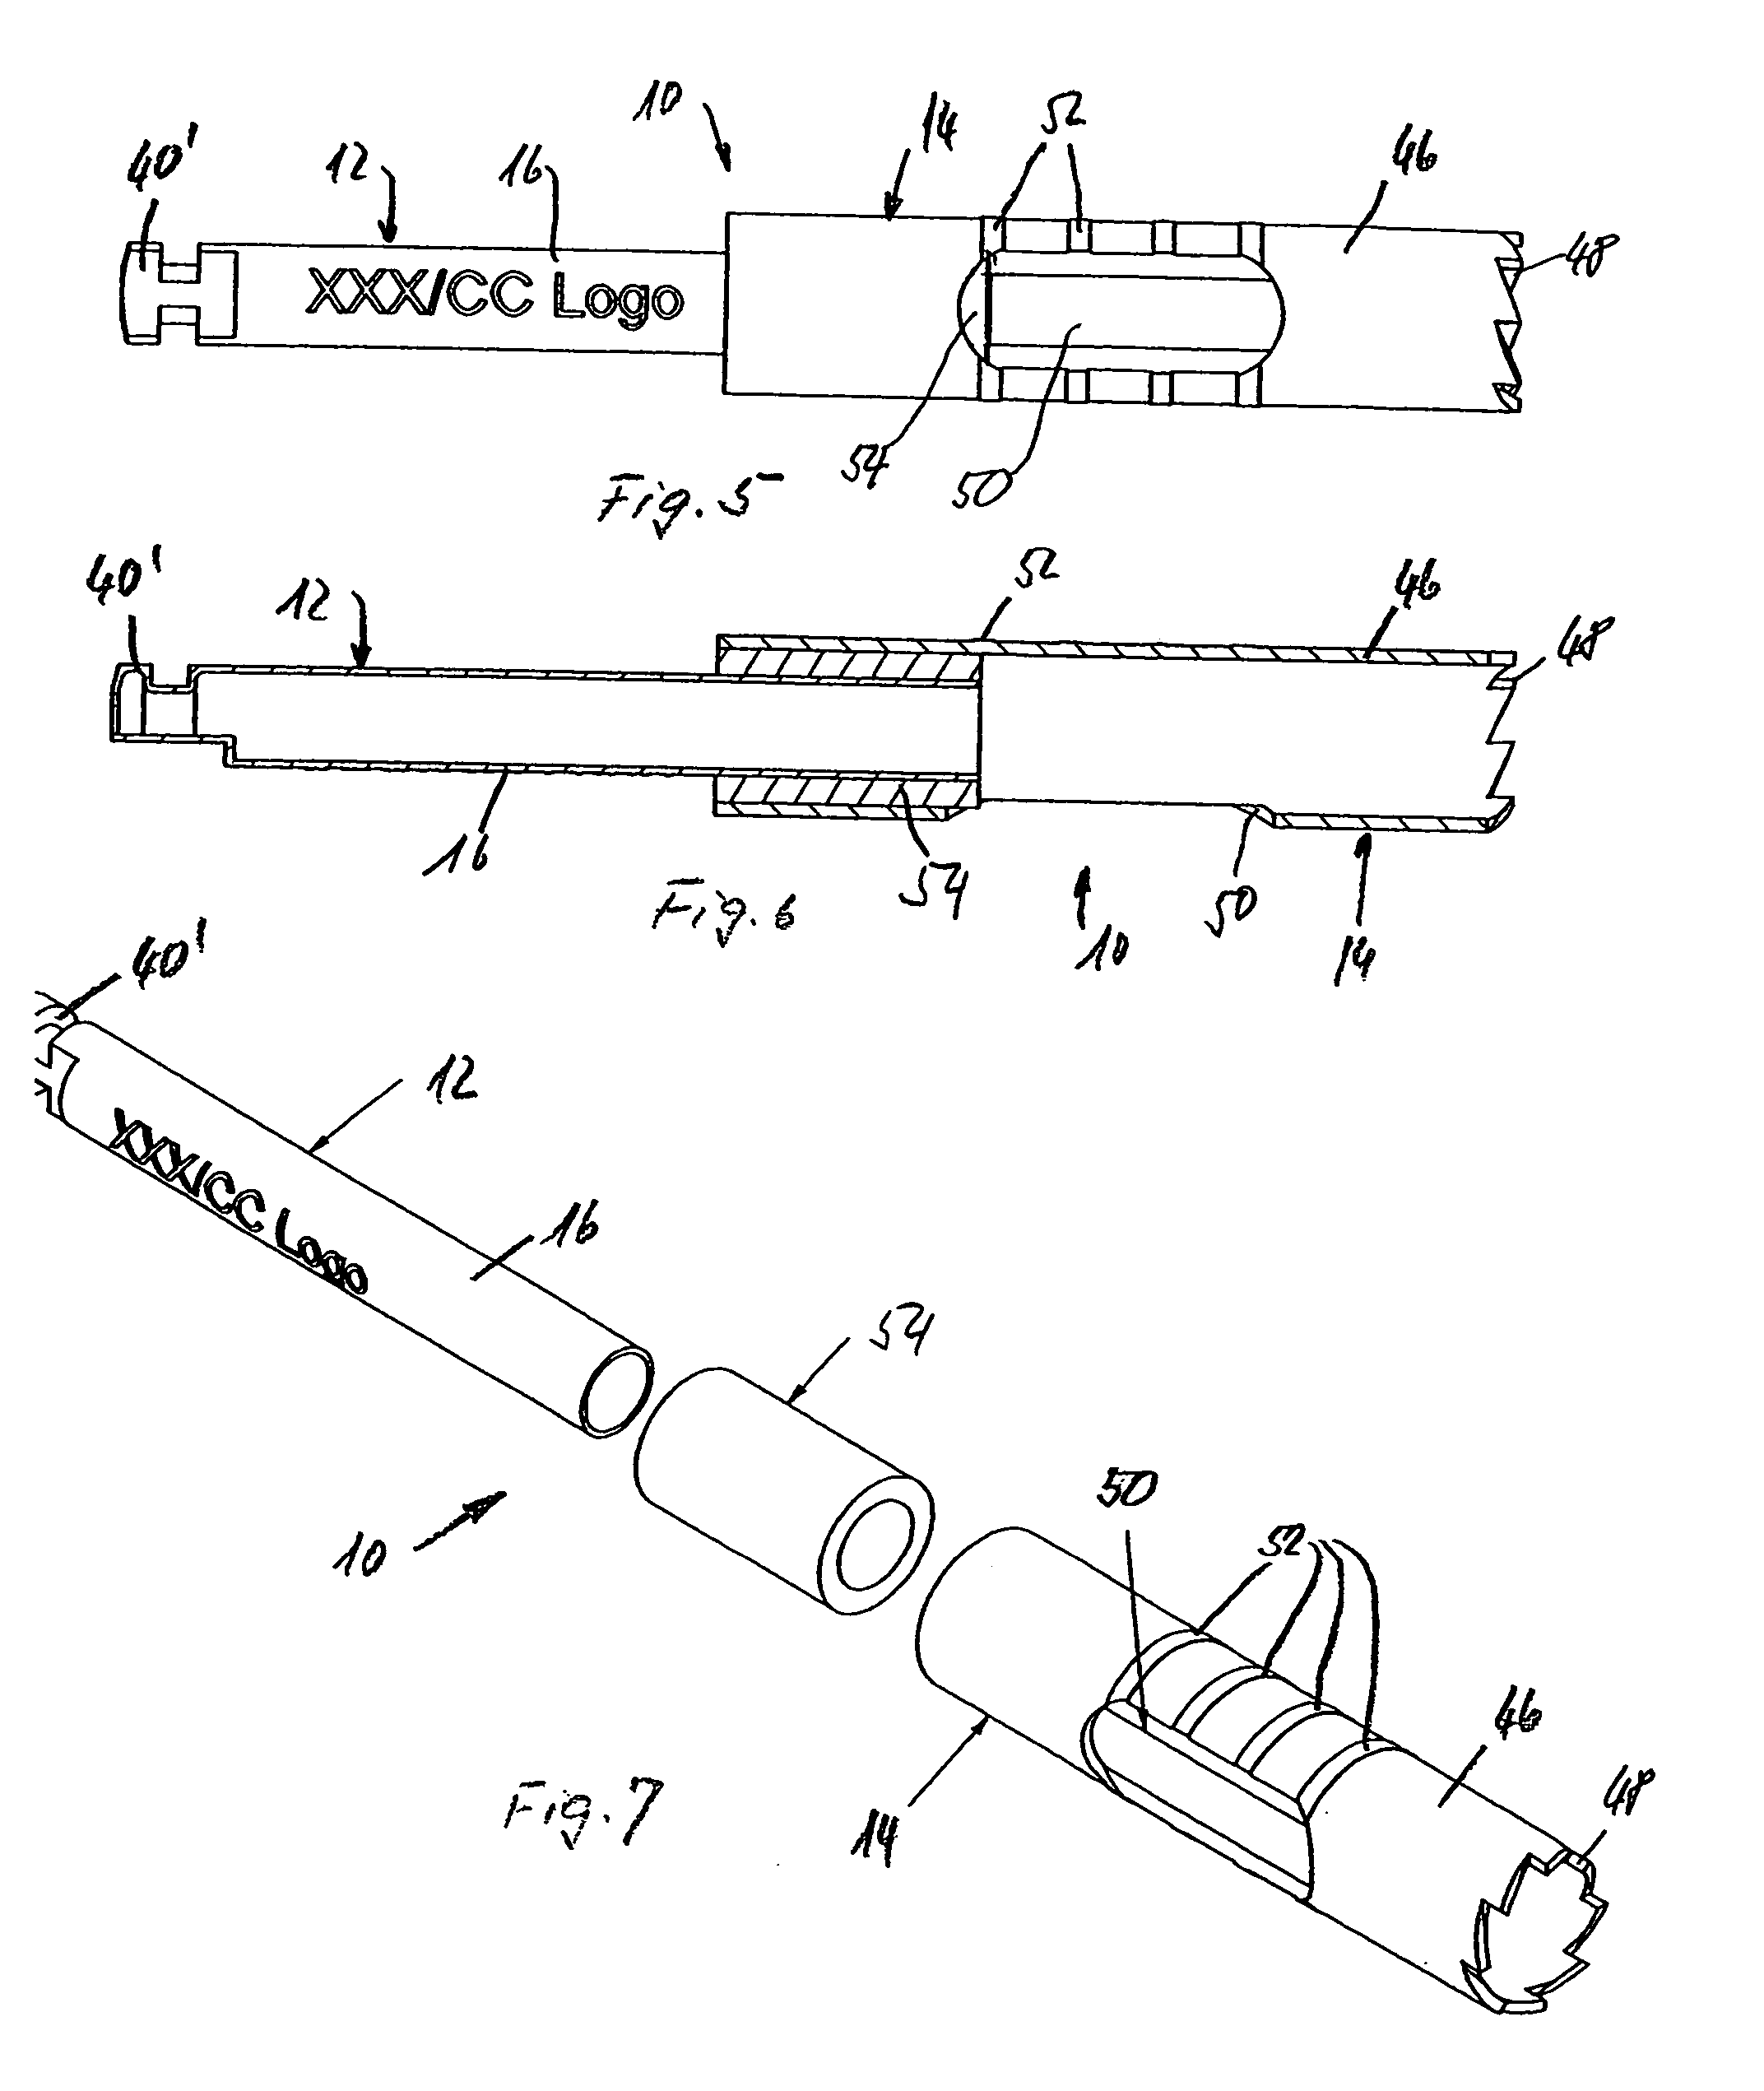 Method for manufacturing disposable rotary cutting tools and disposable rotary tool for dental or medical applications